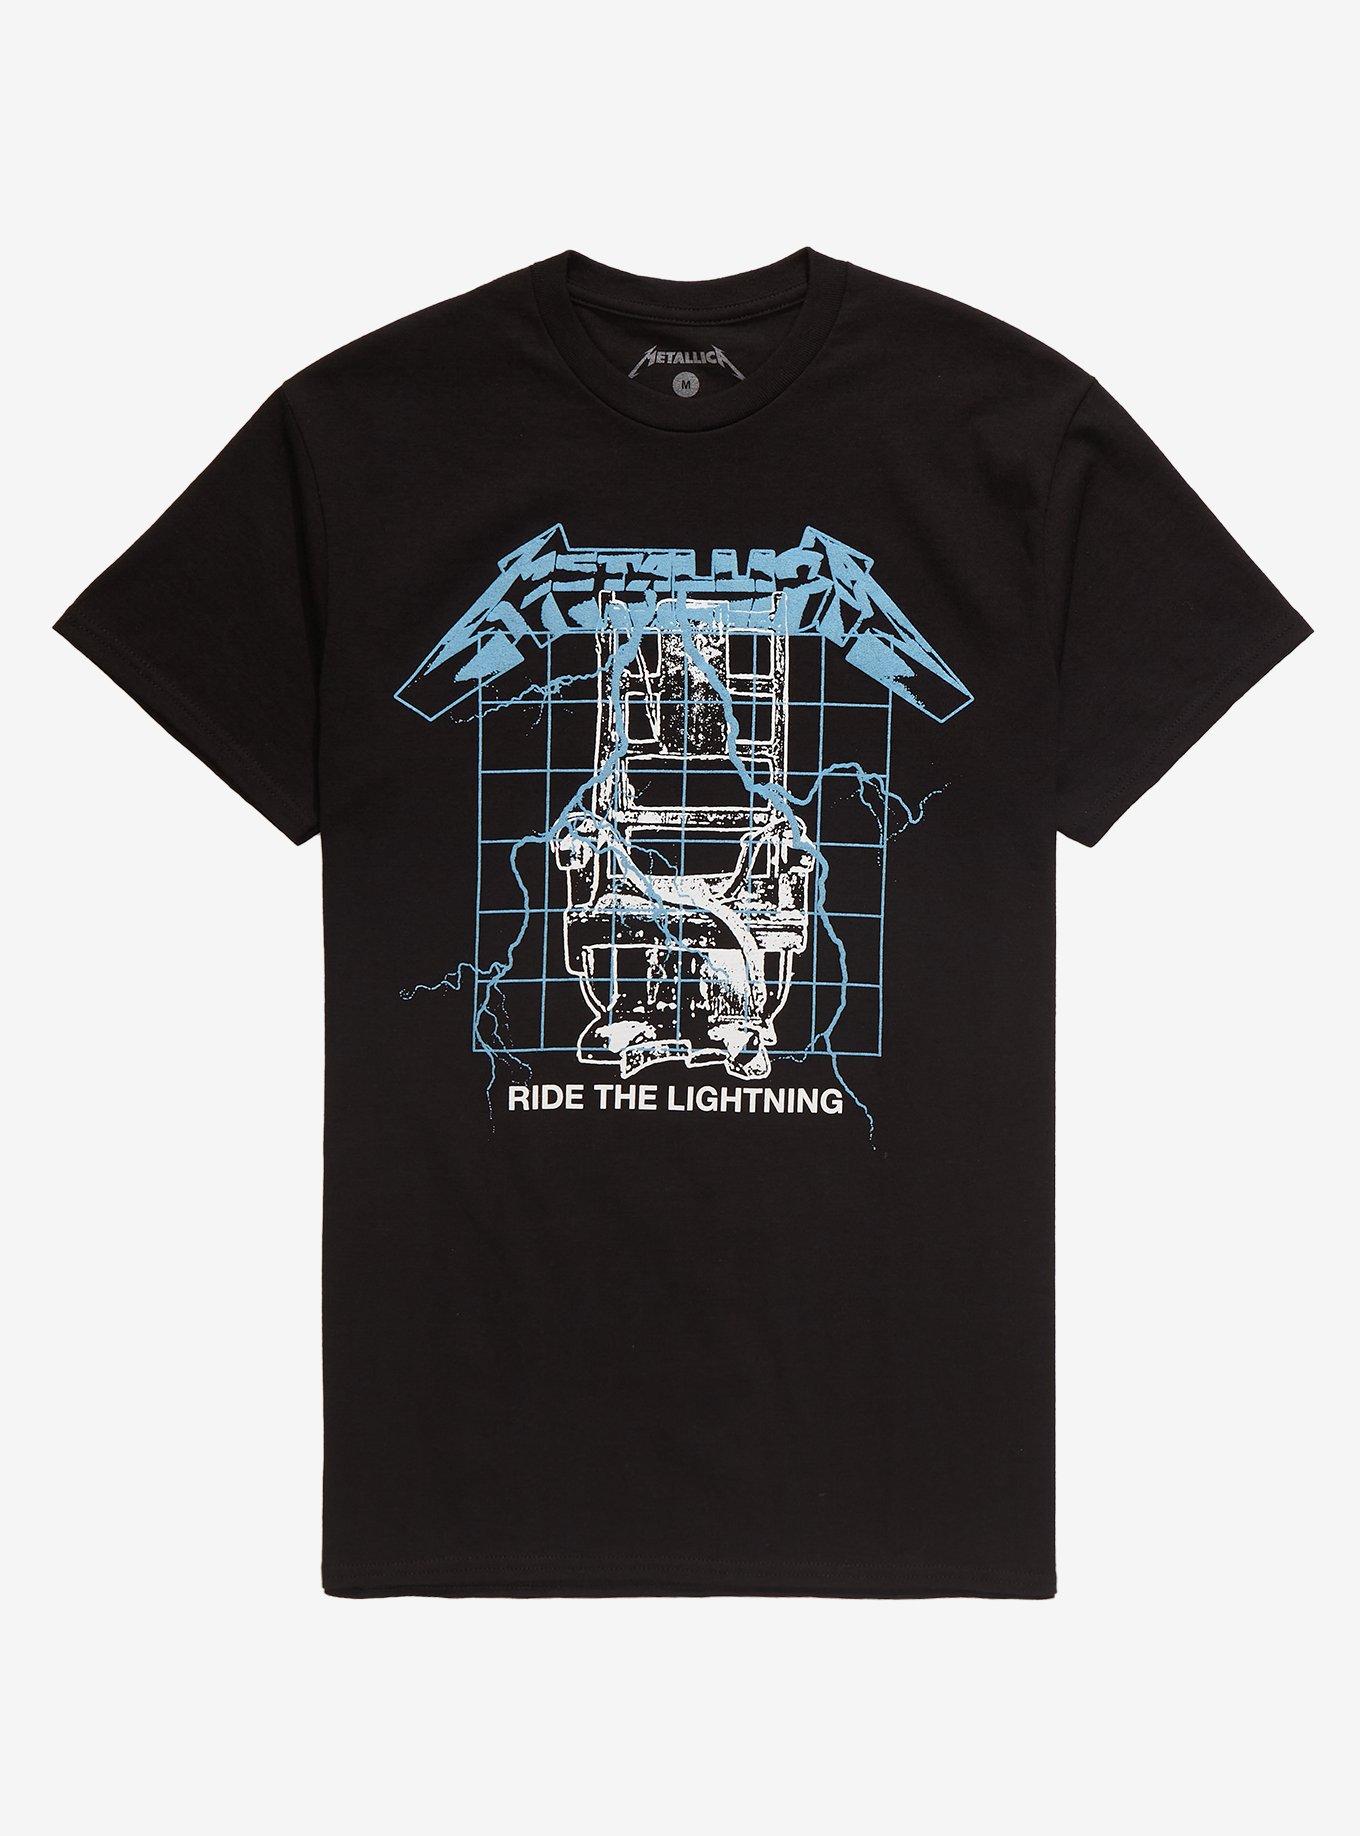  Metallica Ride The Lightning T-Shirt : Clothing, Shoes & Jewelry